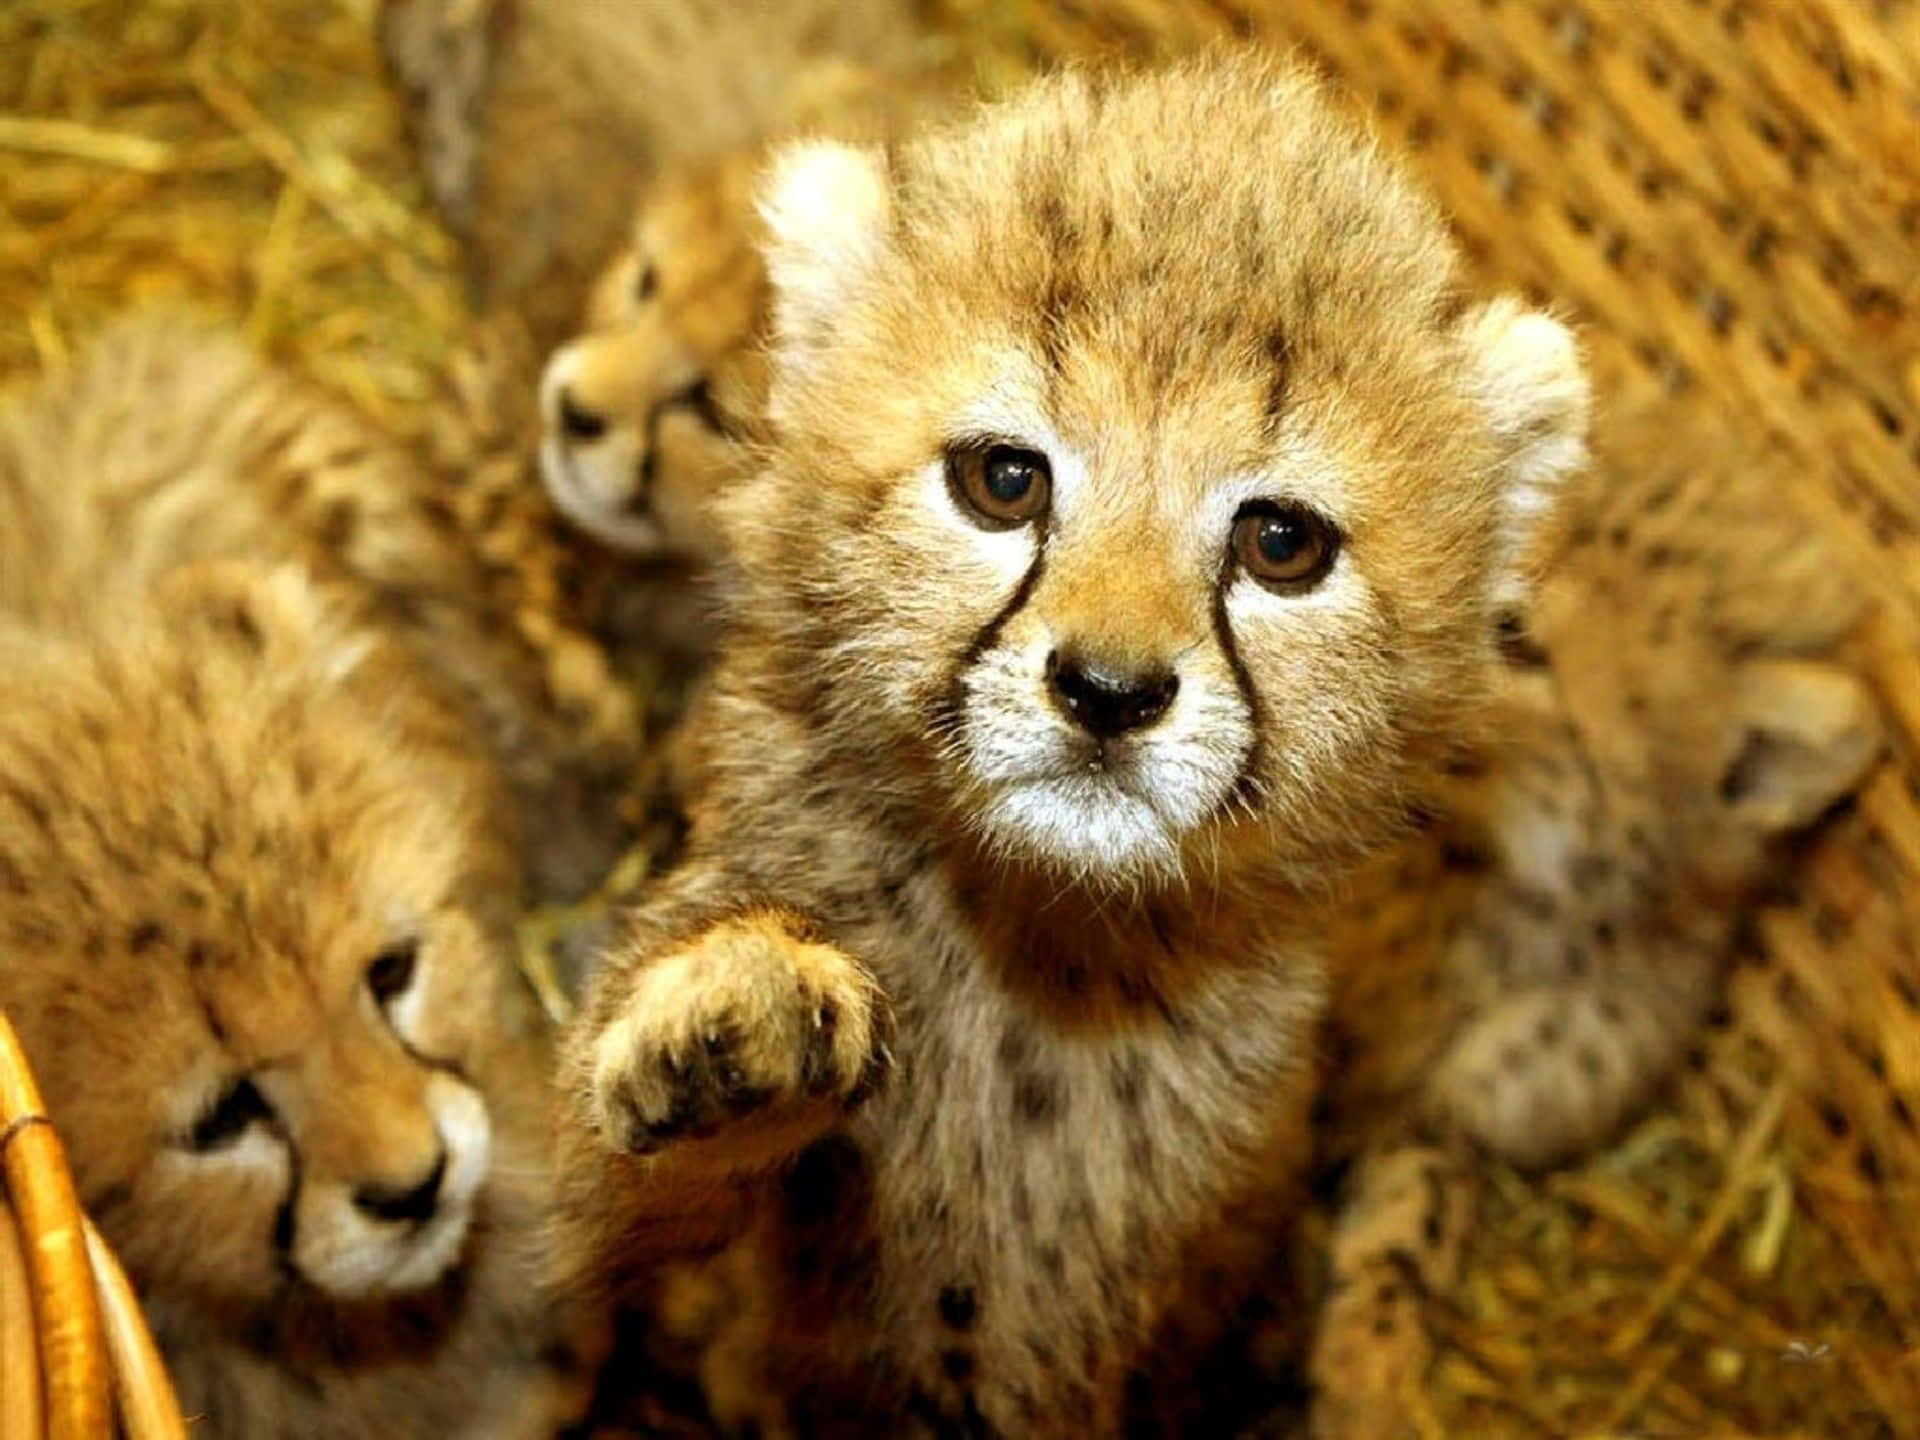 Cheetah Cubs In A Basket With Straw